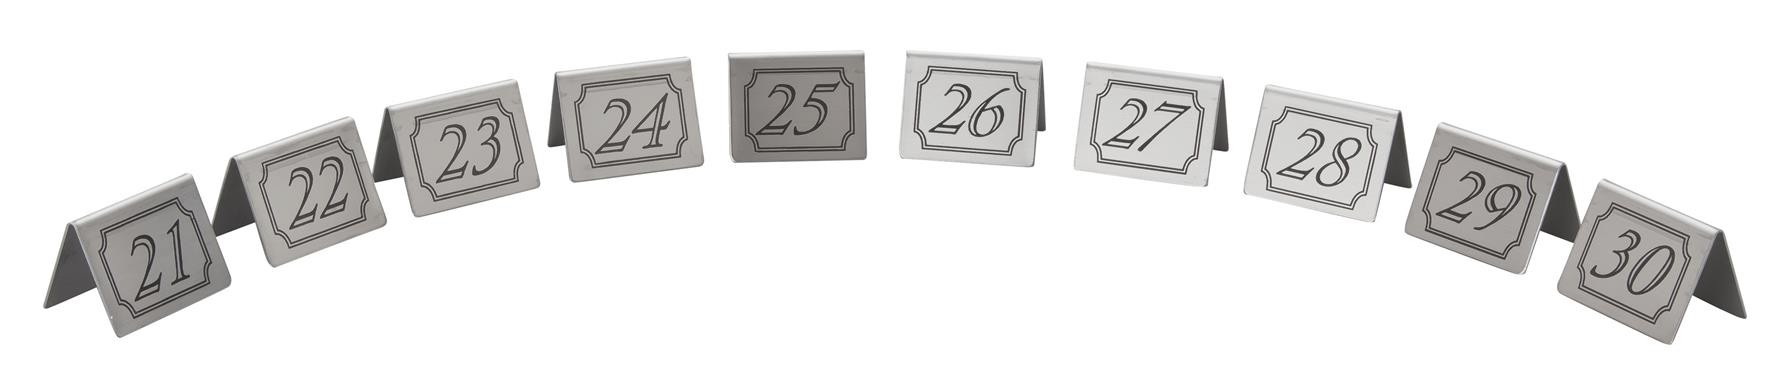 21-30 Stainless Steel Table Numbers (Each) 21-30, Stainless, Steel, Table, Numbers, Beaumont